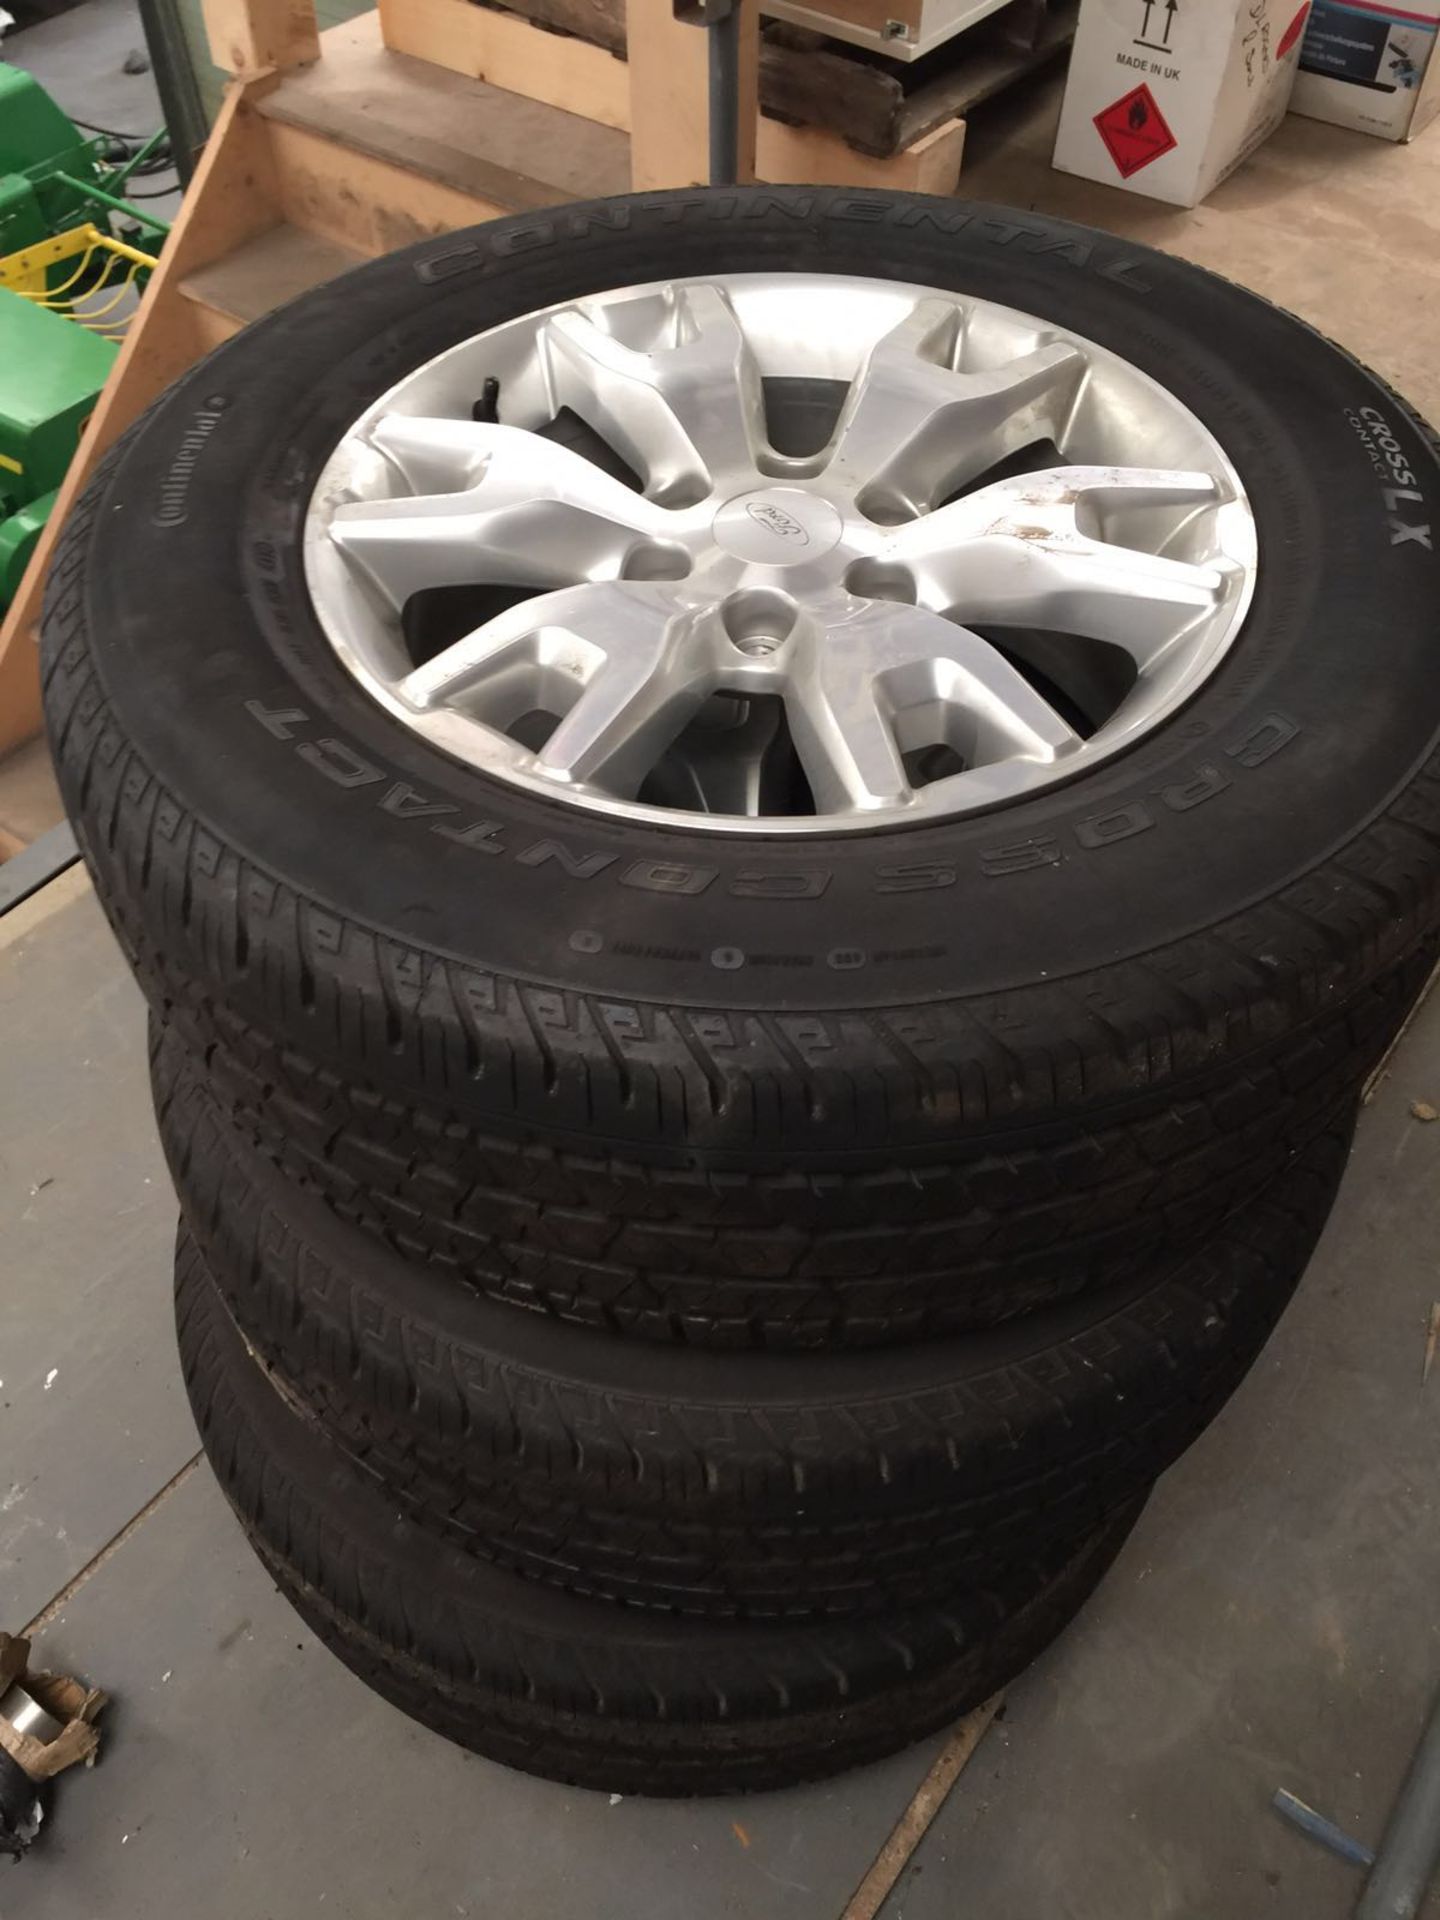 SET OF 4 2016 18" FORD RANGER ALLOY WHEELS WITH CONTINENTAL CROSS CONTACT TYRES ONLY 100 MILES